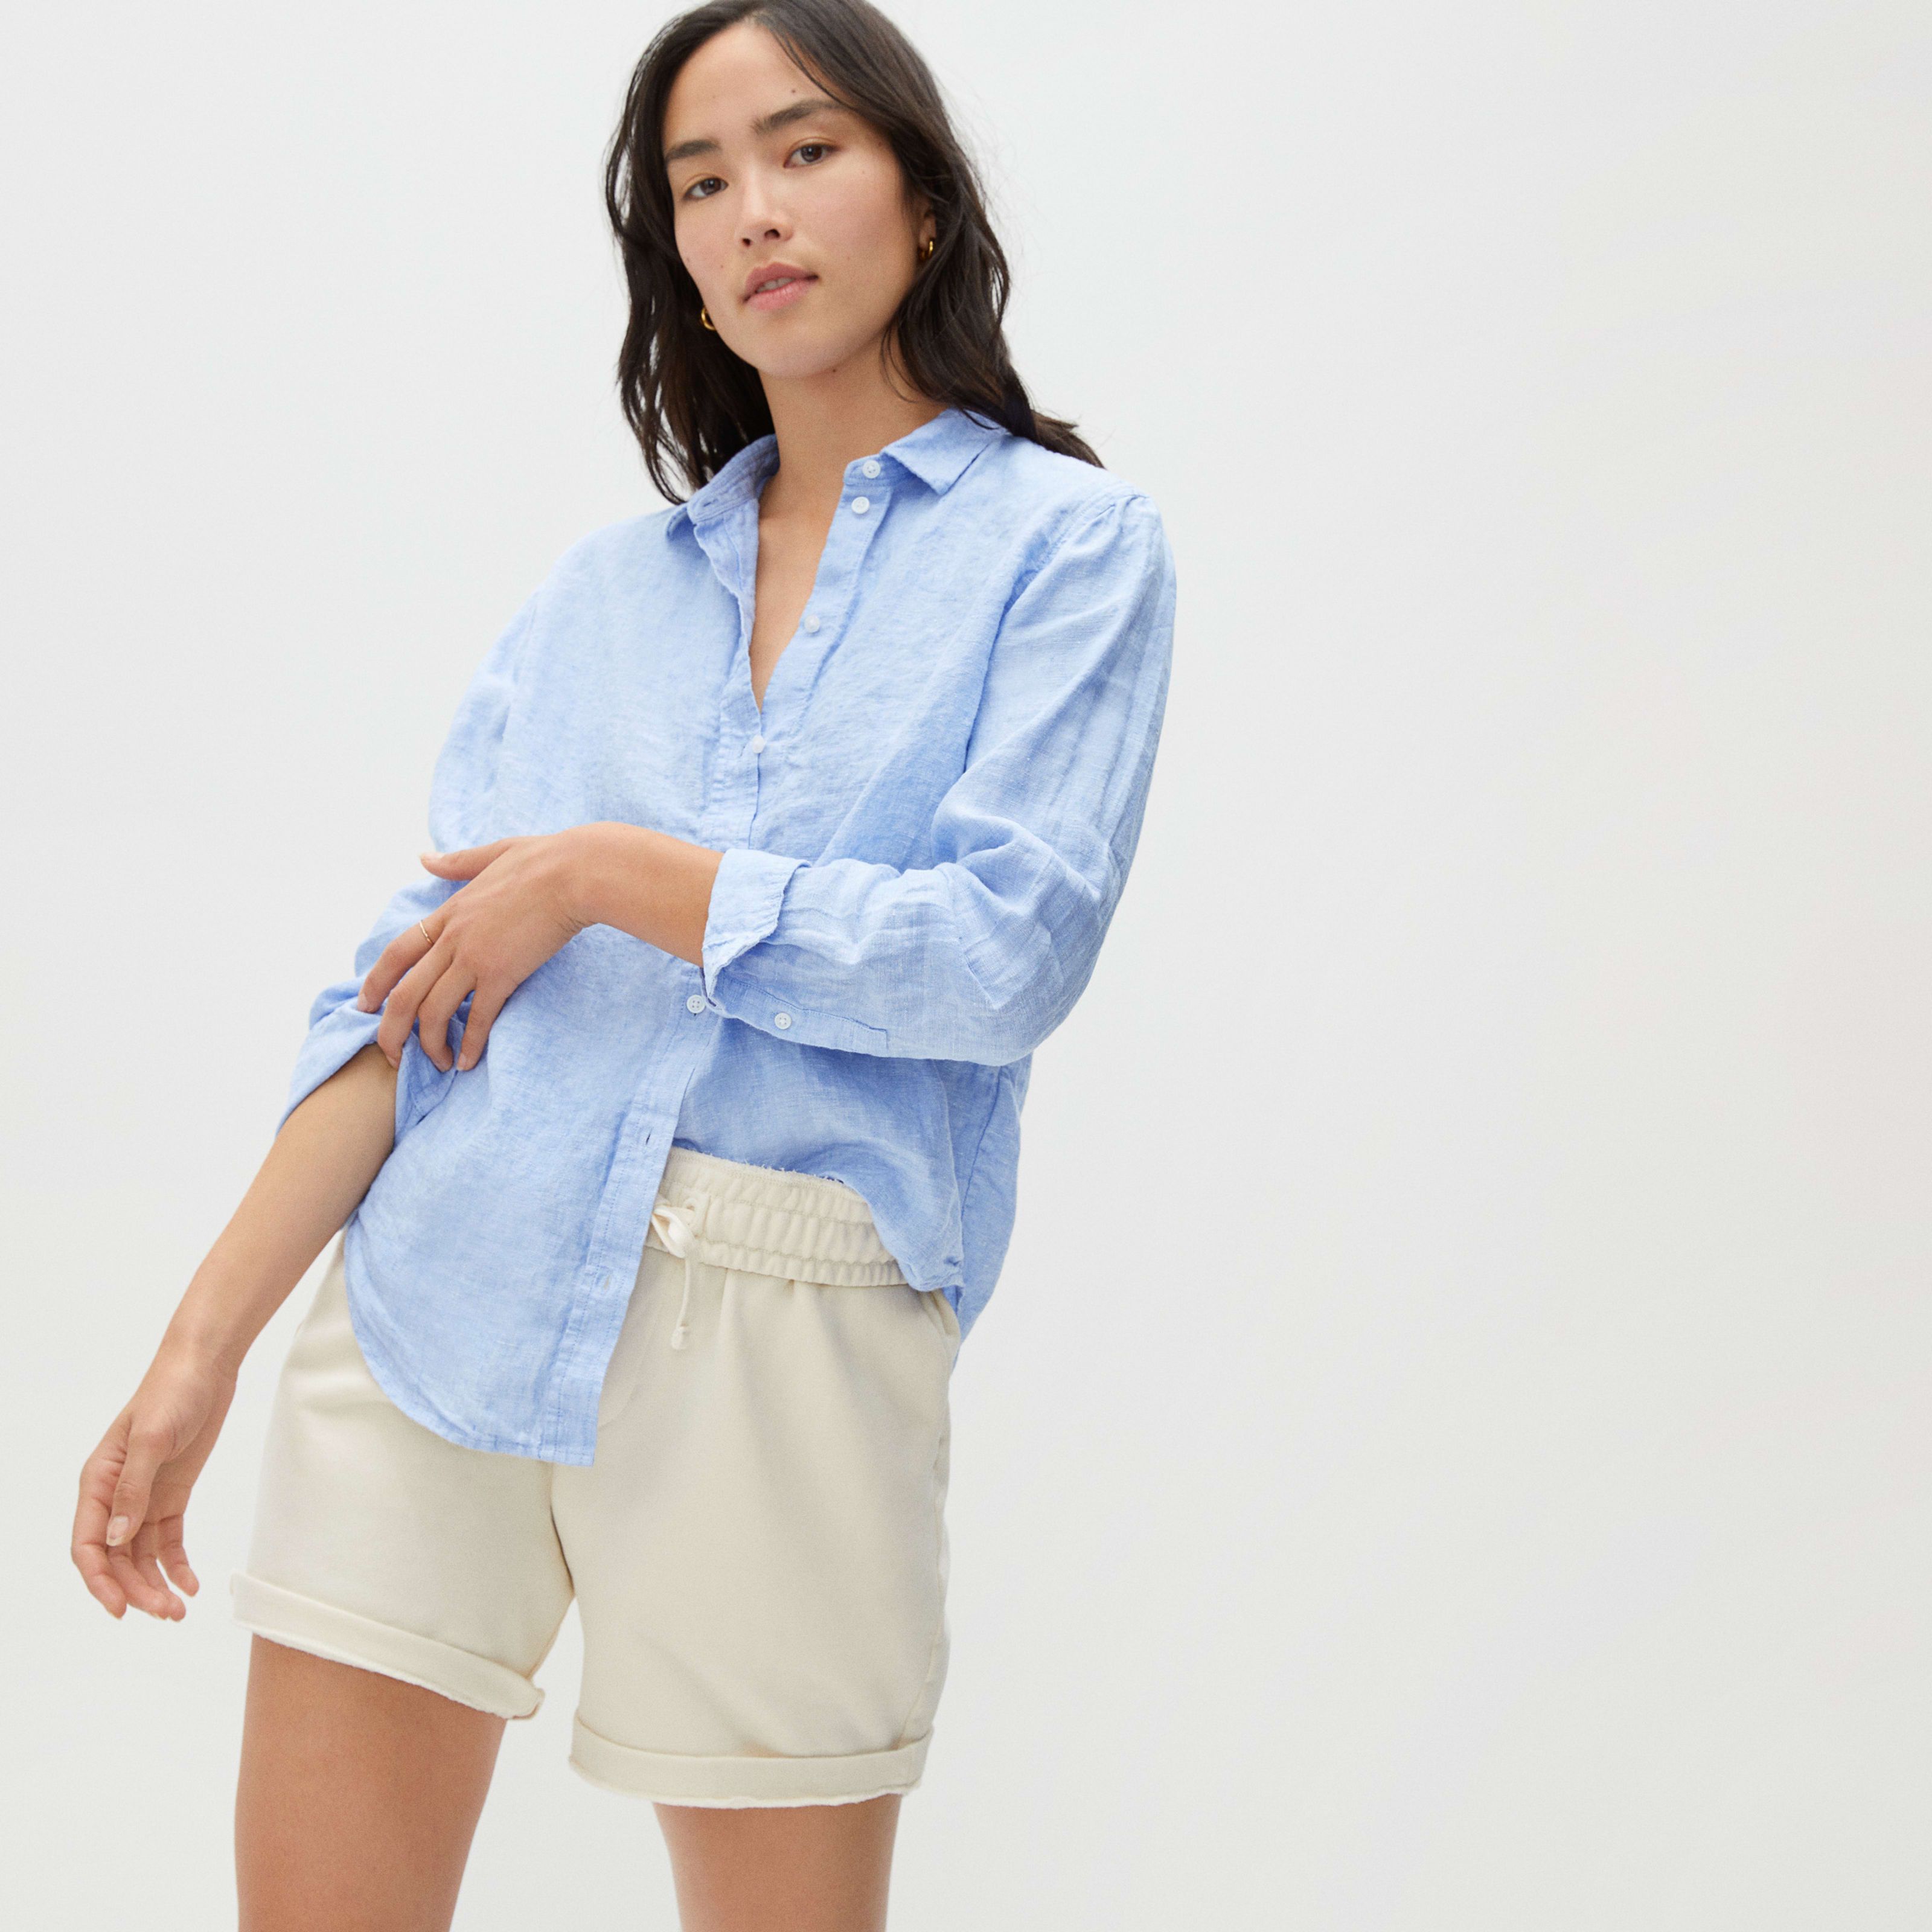 Women's Linen Relaxed Shirt by Everlane in Classic Blue, Size 0 | Everlane